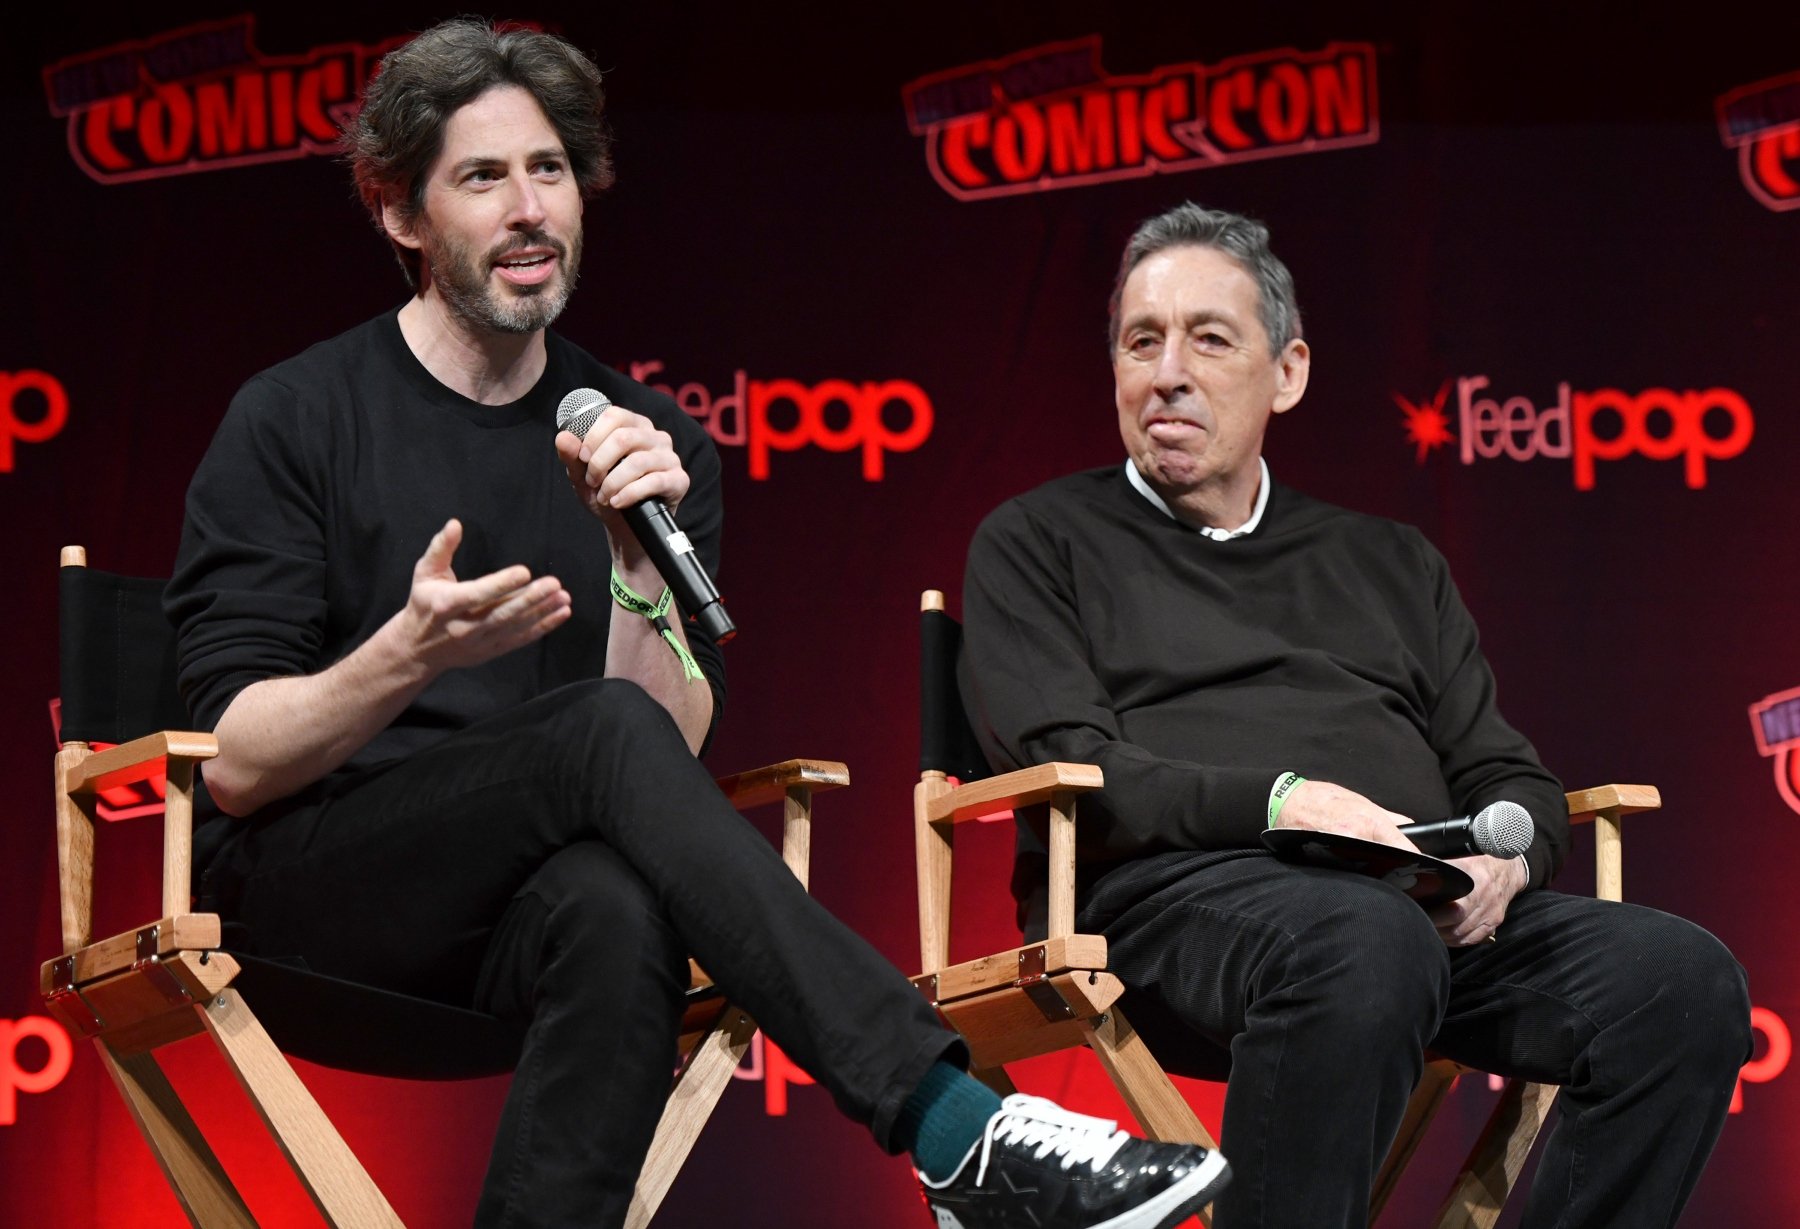 Jason Reitman and father Ivan Reitman attend NY Comic-Con panel for 'Ghostbusters Afterlife'